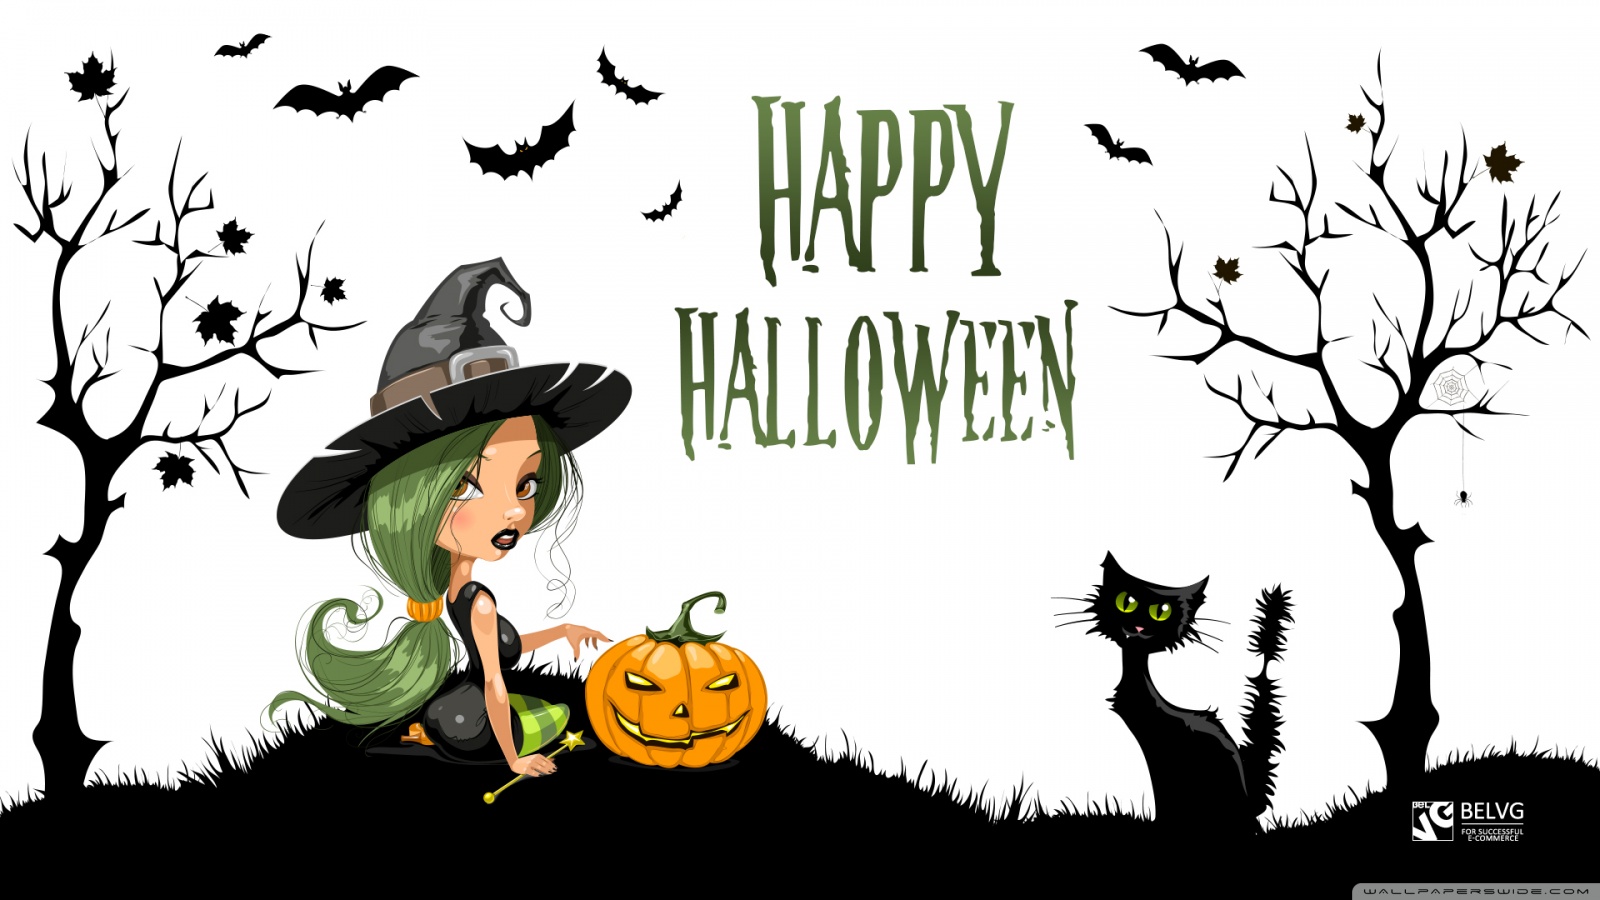 Top 26 Halloween Wallpapers for Windows 7,8 and XP All for